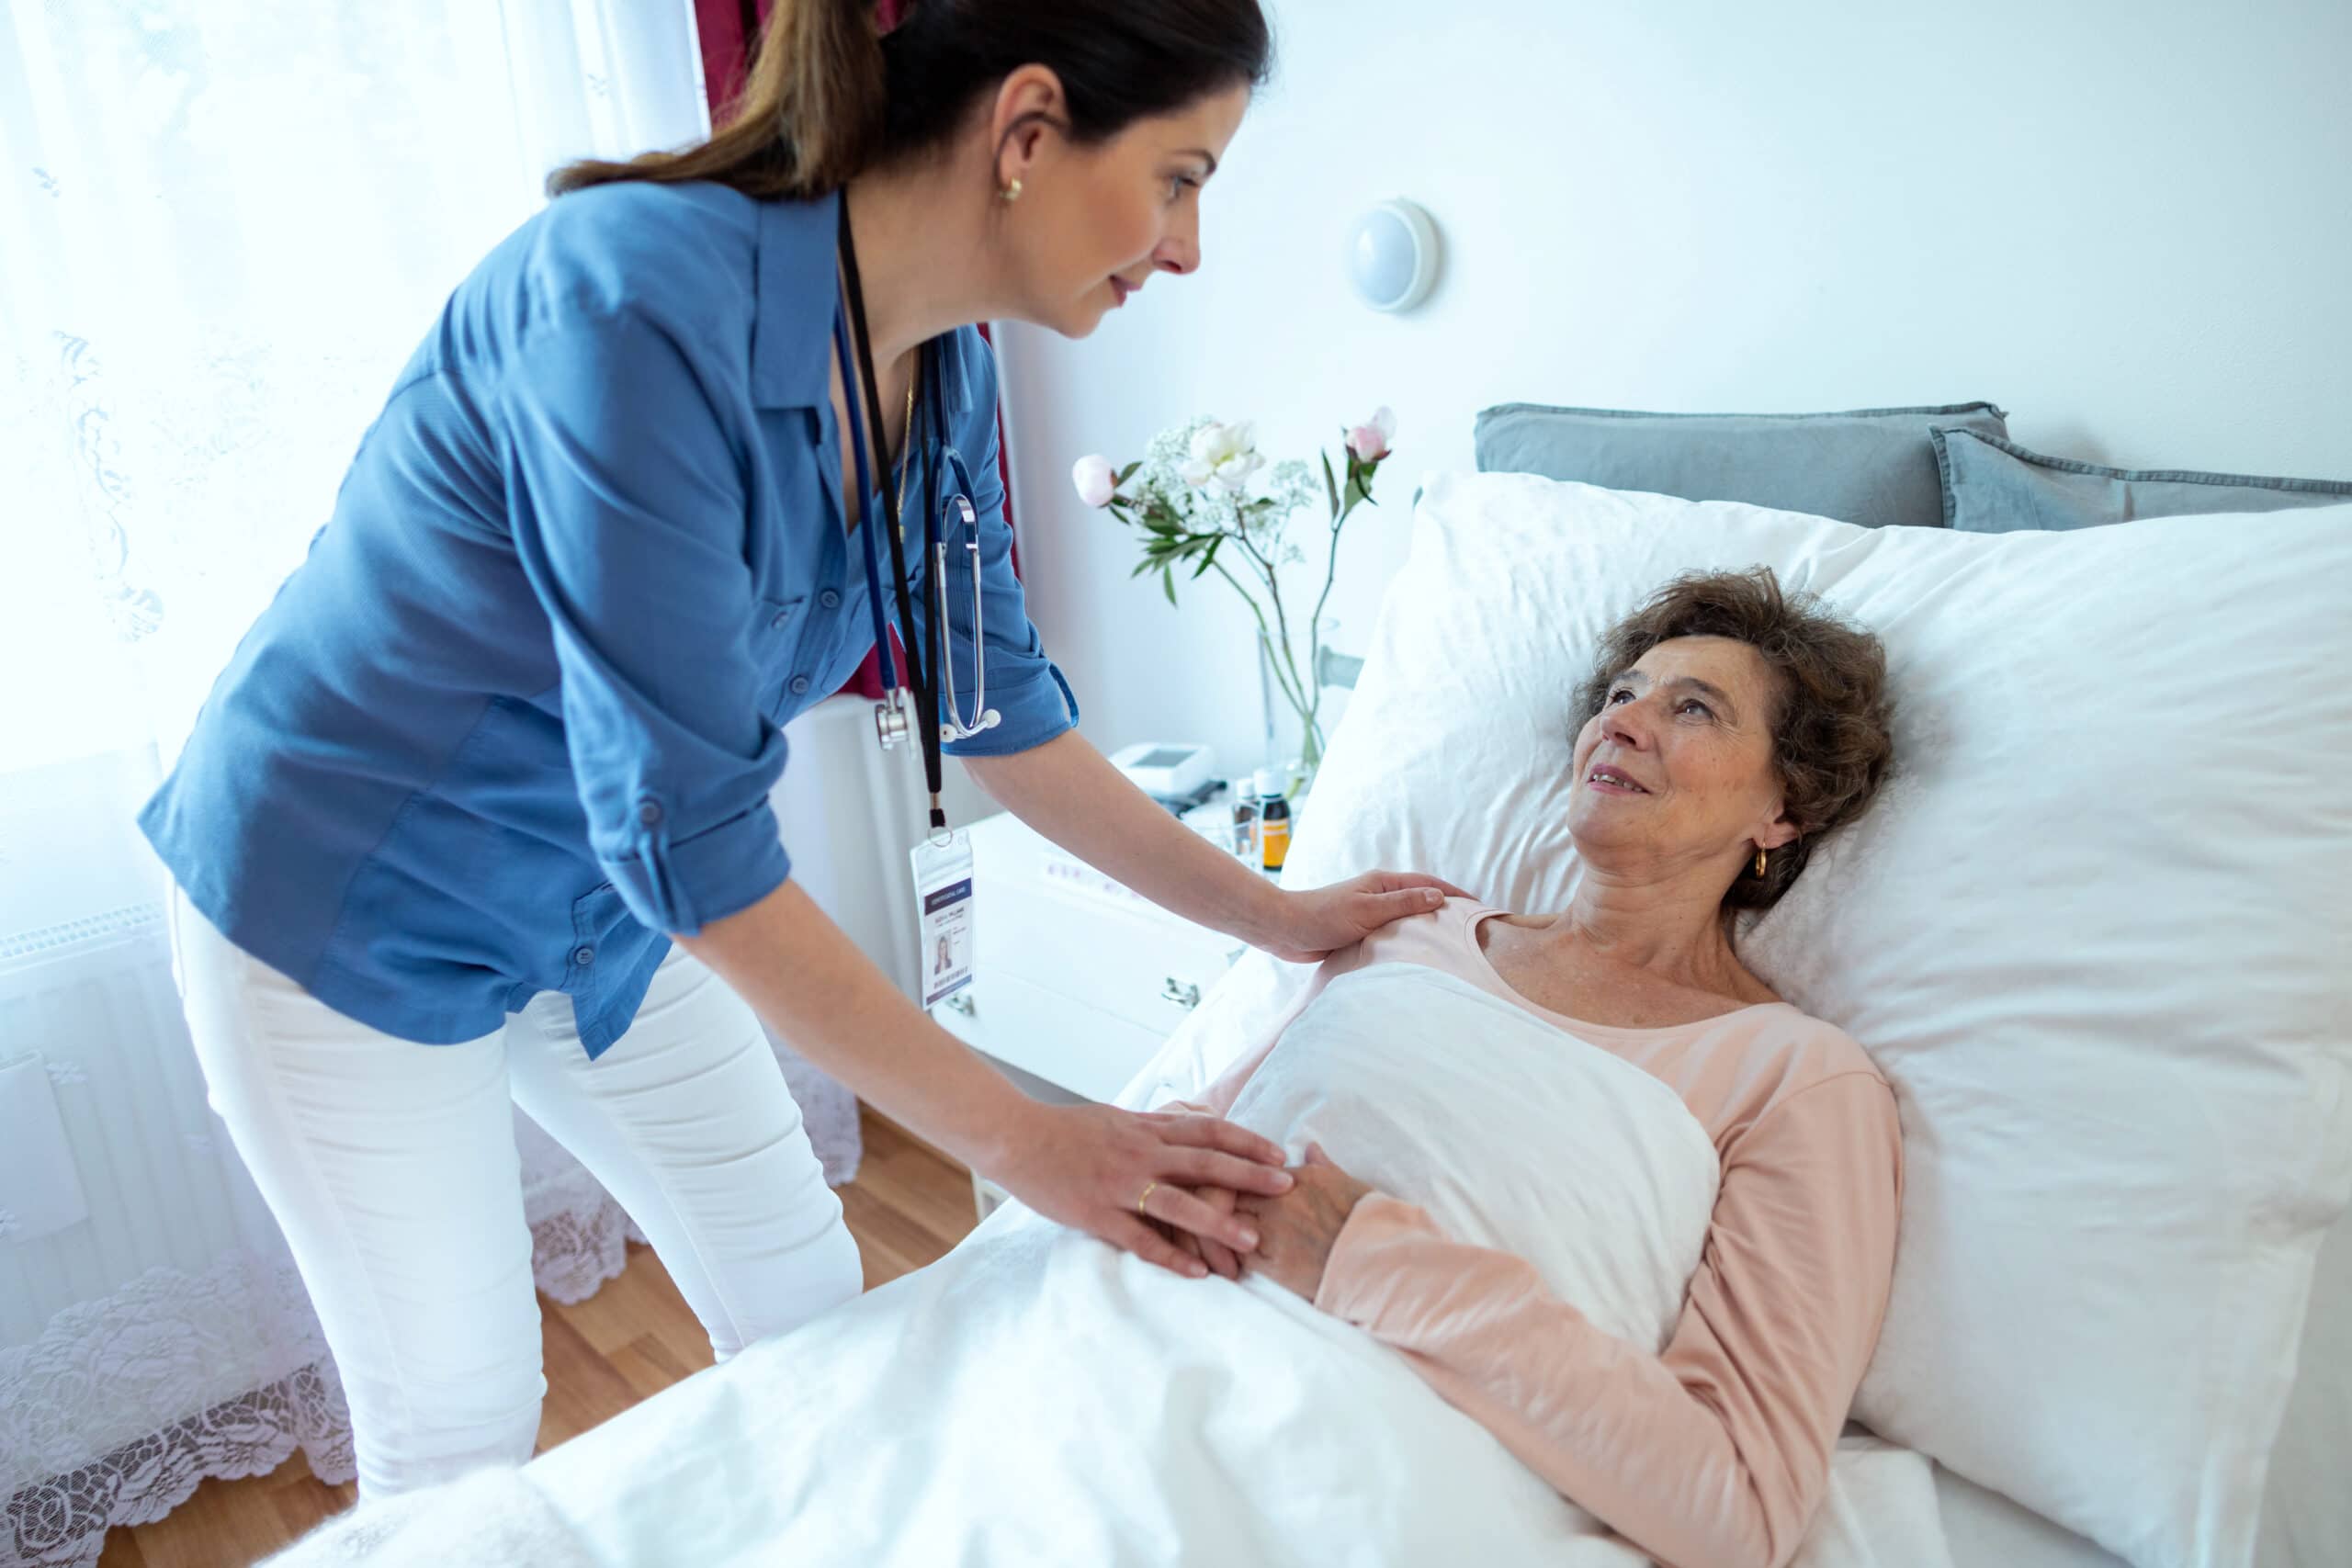 Top 24-Hour Home Care in Elizabeth, NJ by Adult Alternative Home Care. Companion Care, Personal Care, Hourly Care, Live-In Care.